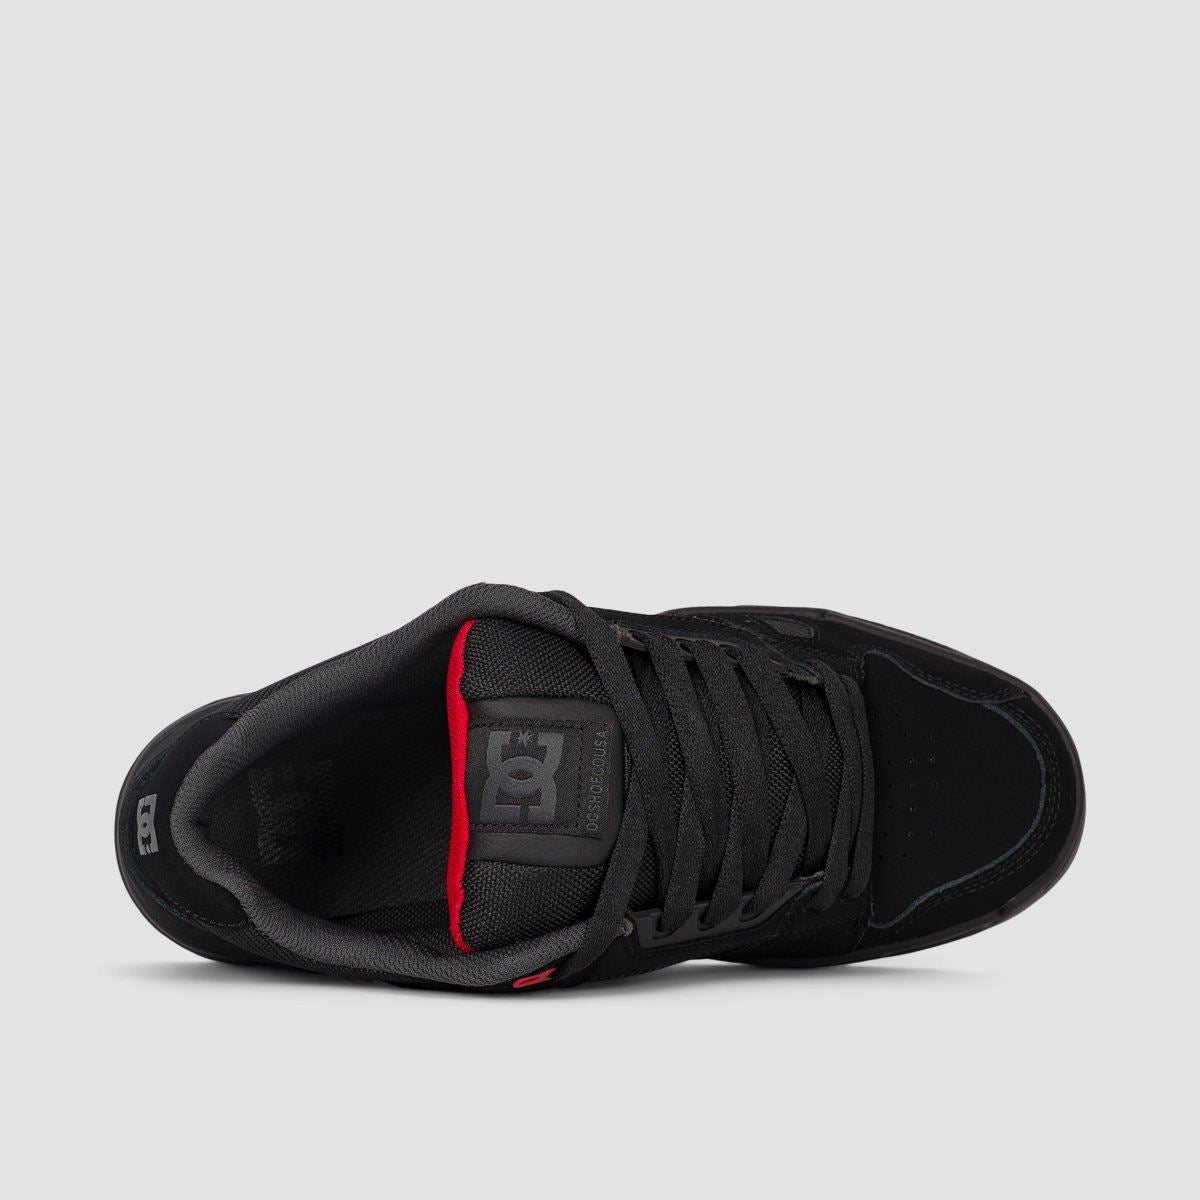 DC Stag Shoes - Black/Grey/Red